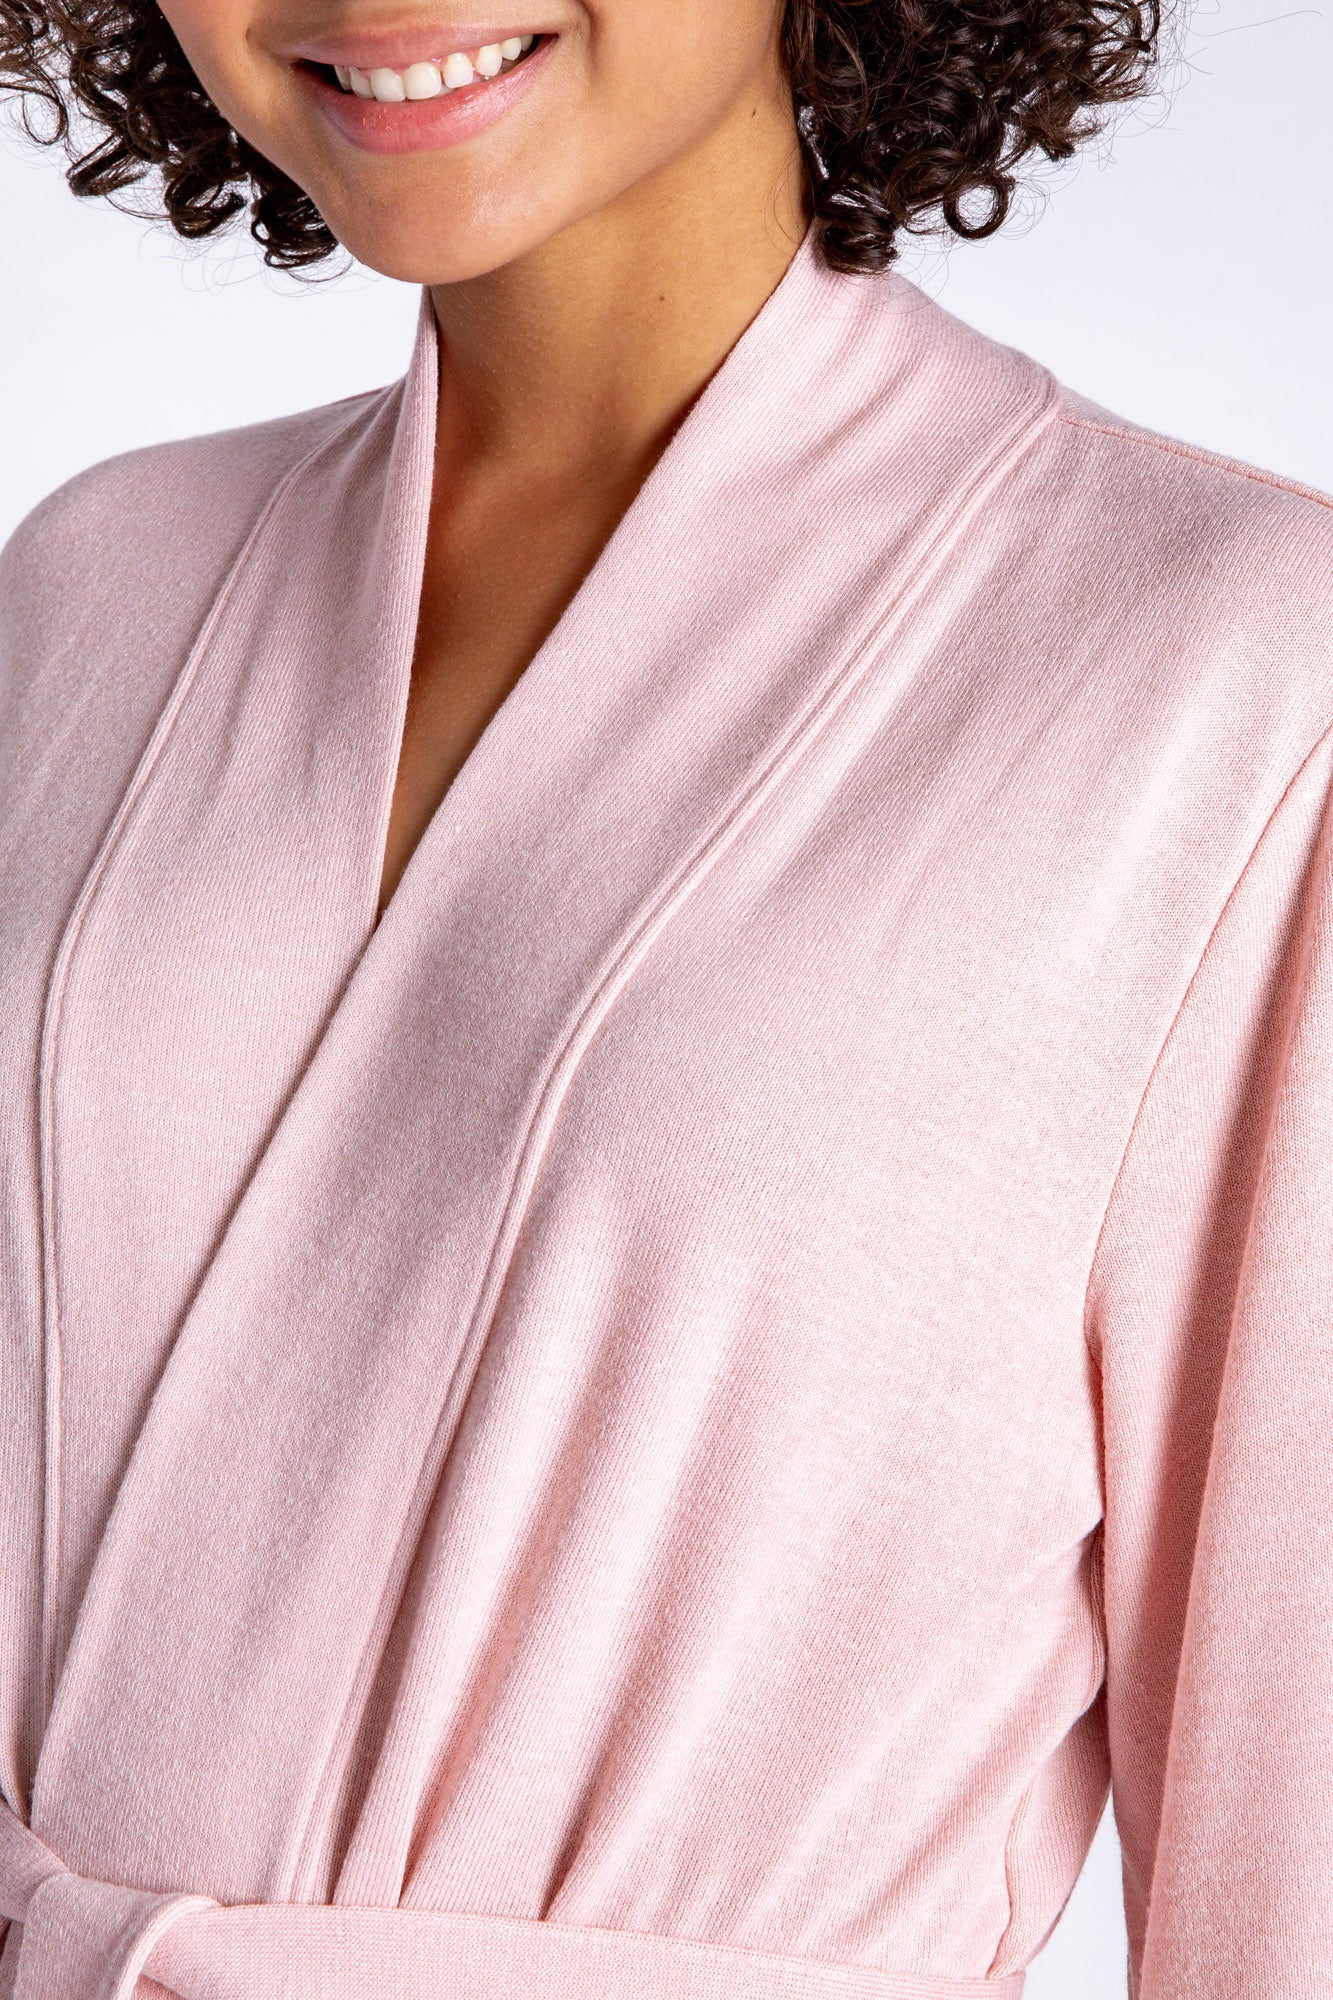 Reloved Lounge Robe